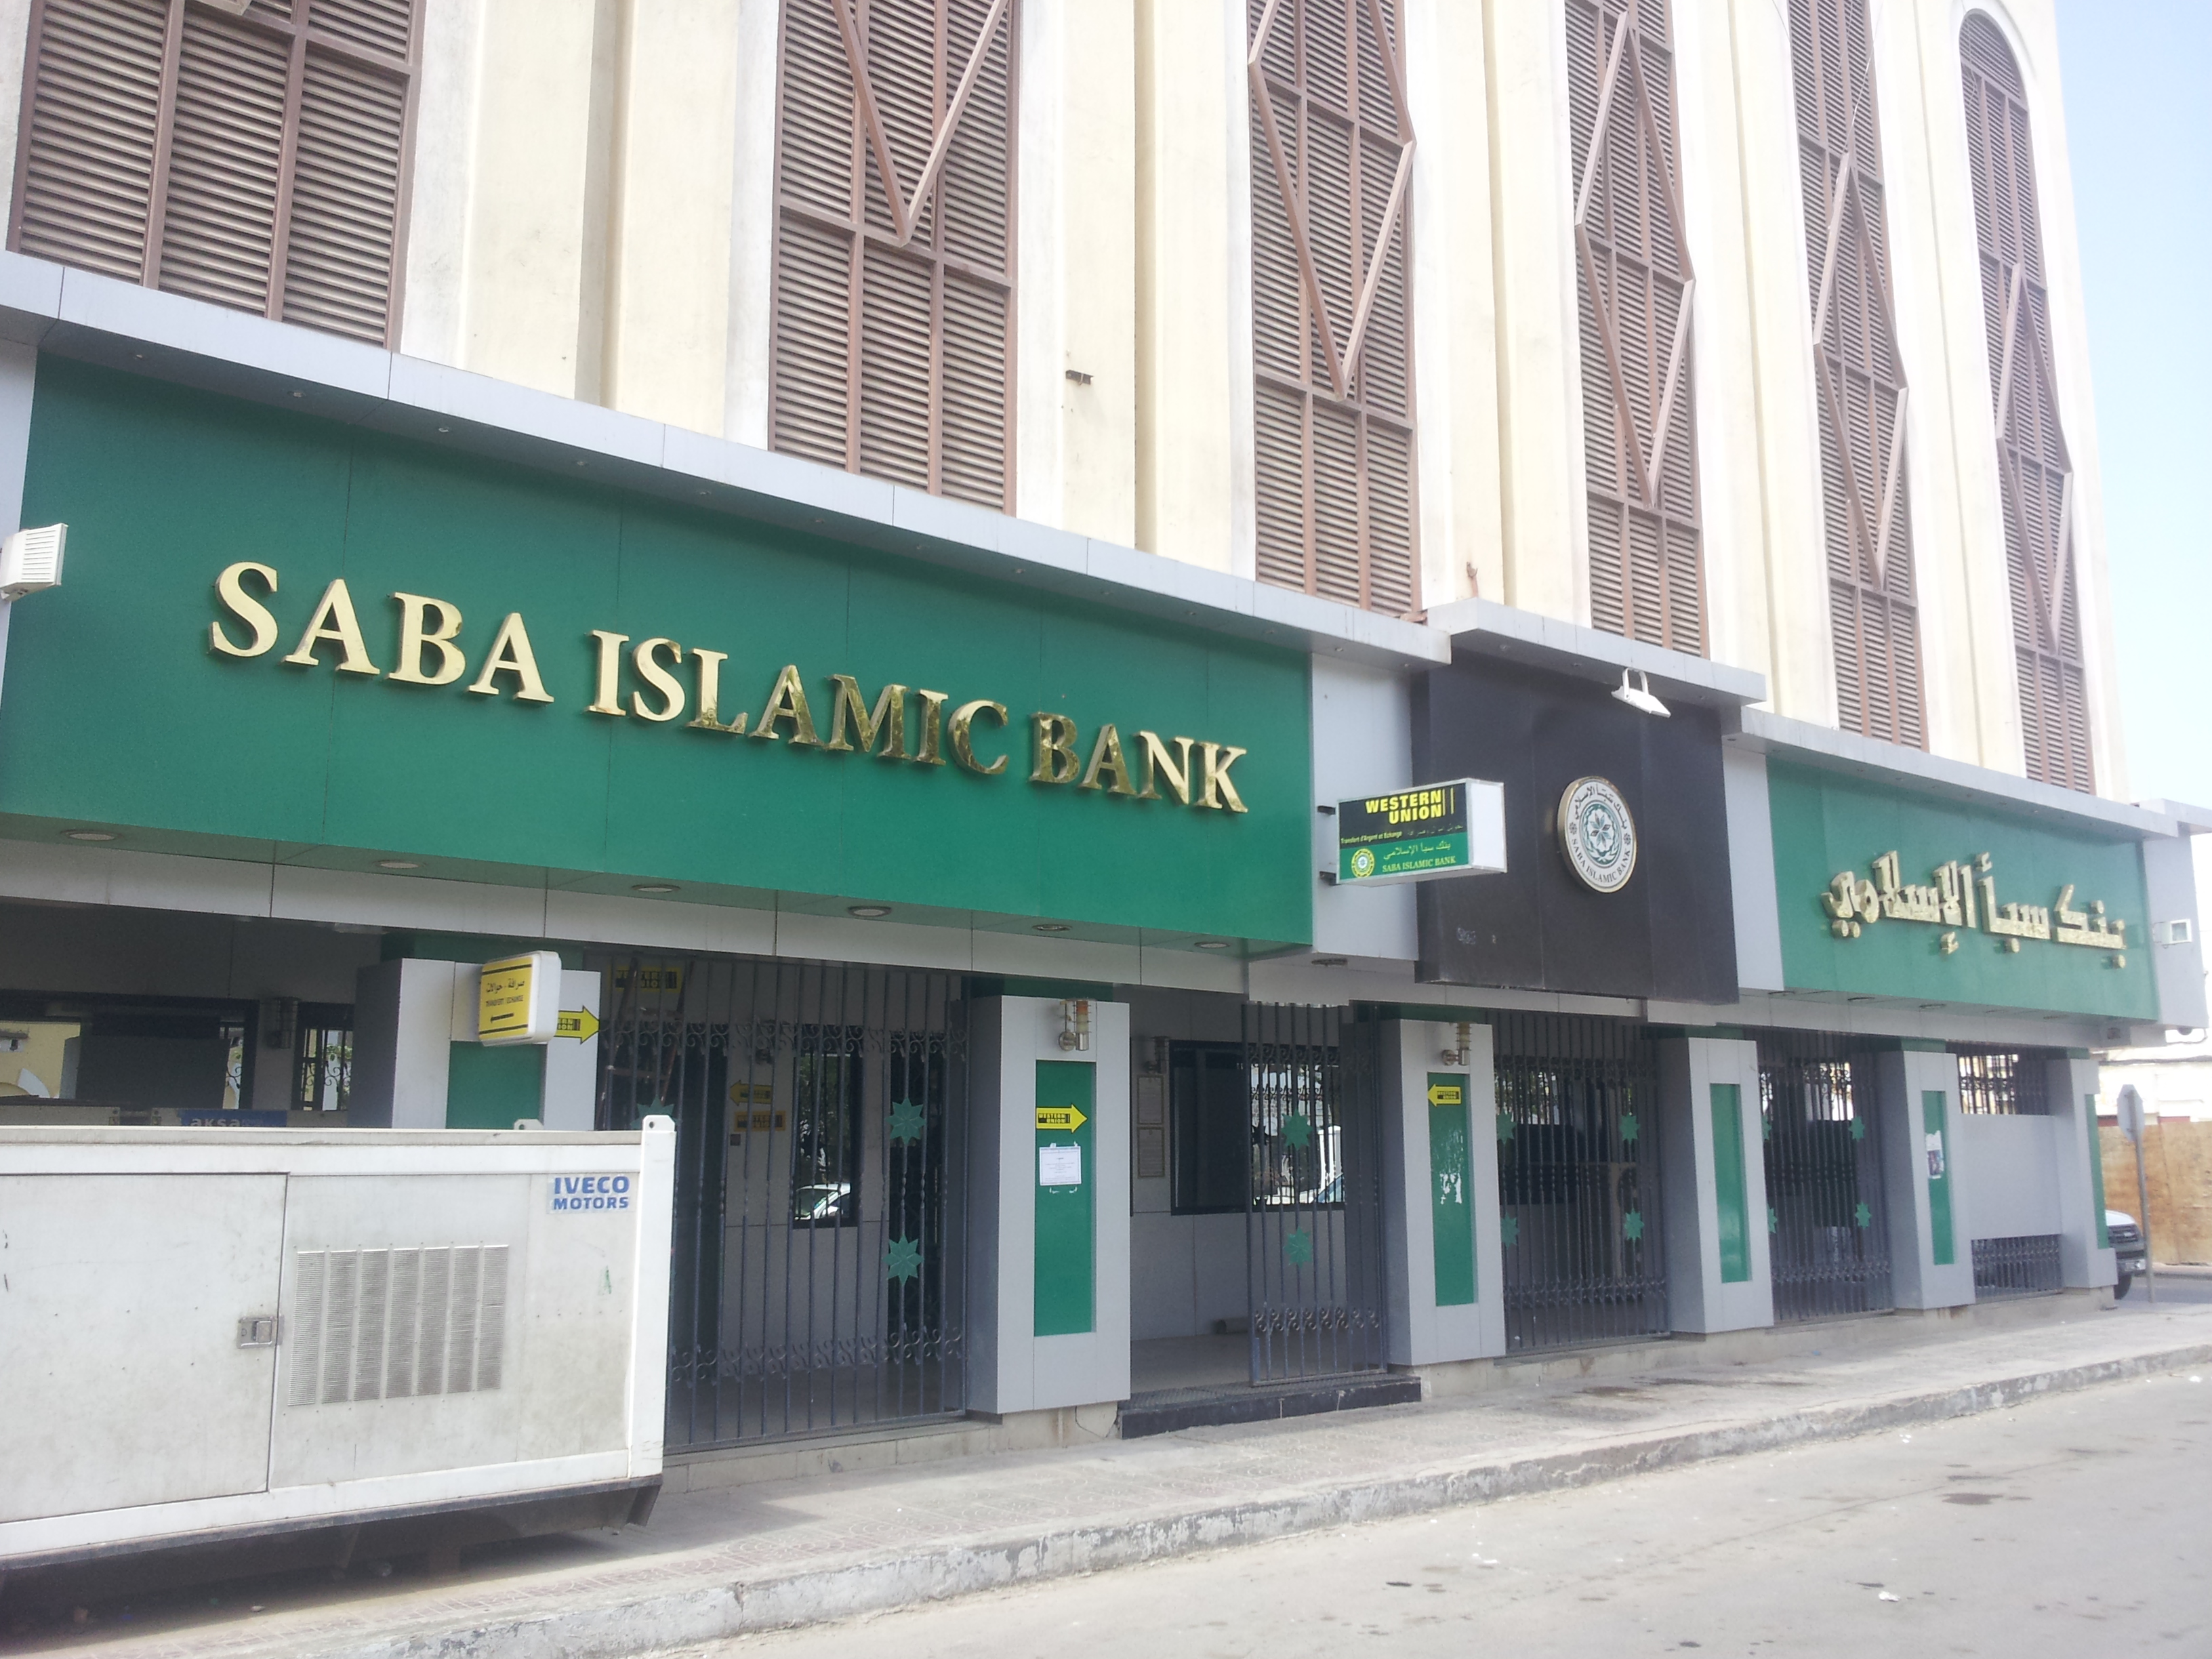 Origins and models of Islamic banking